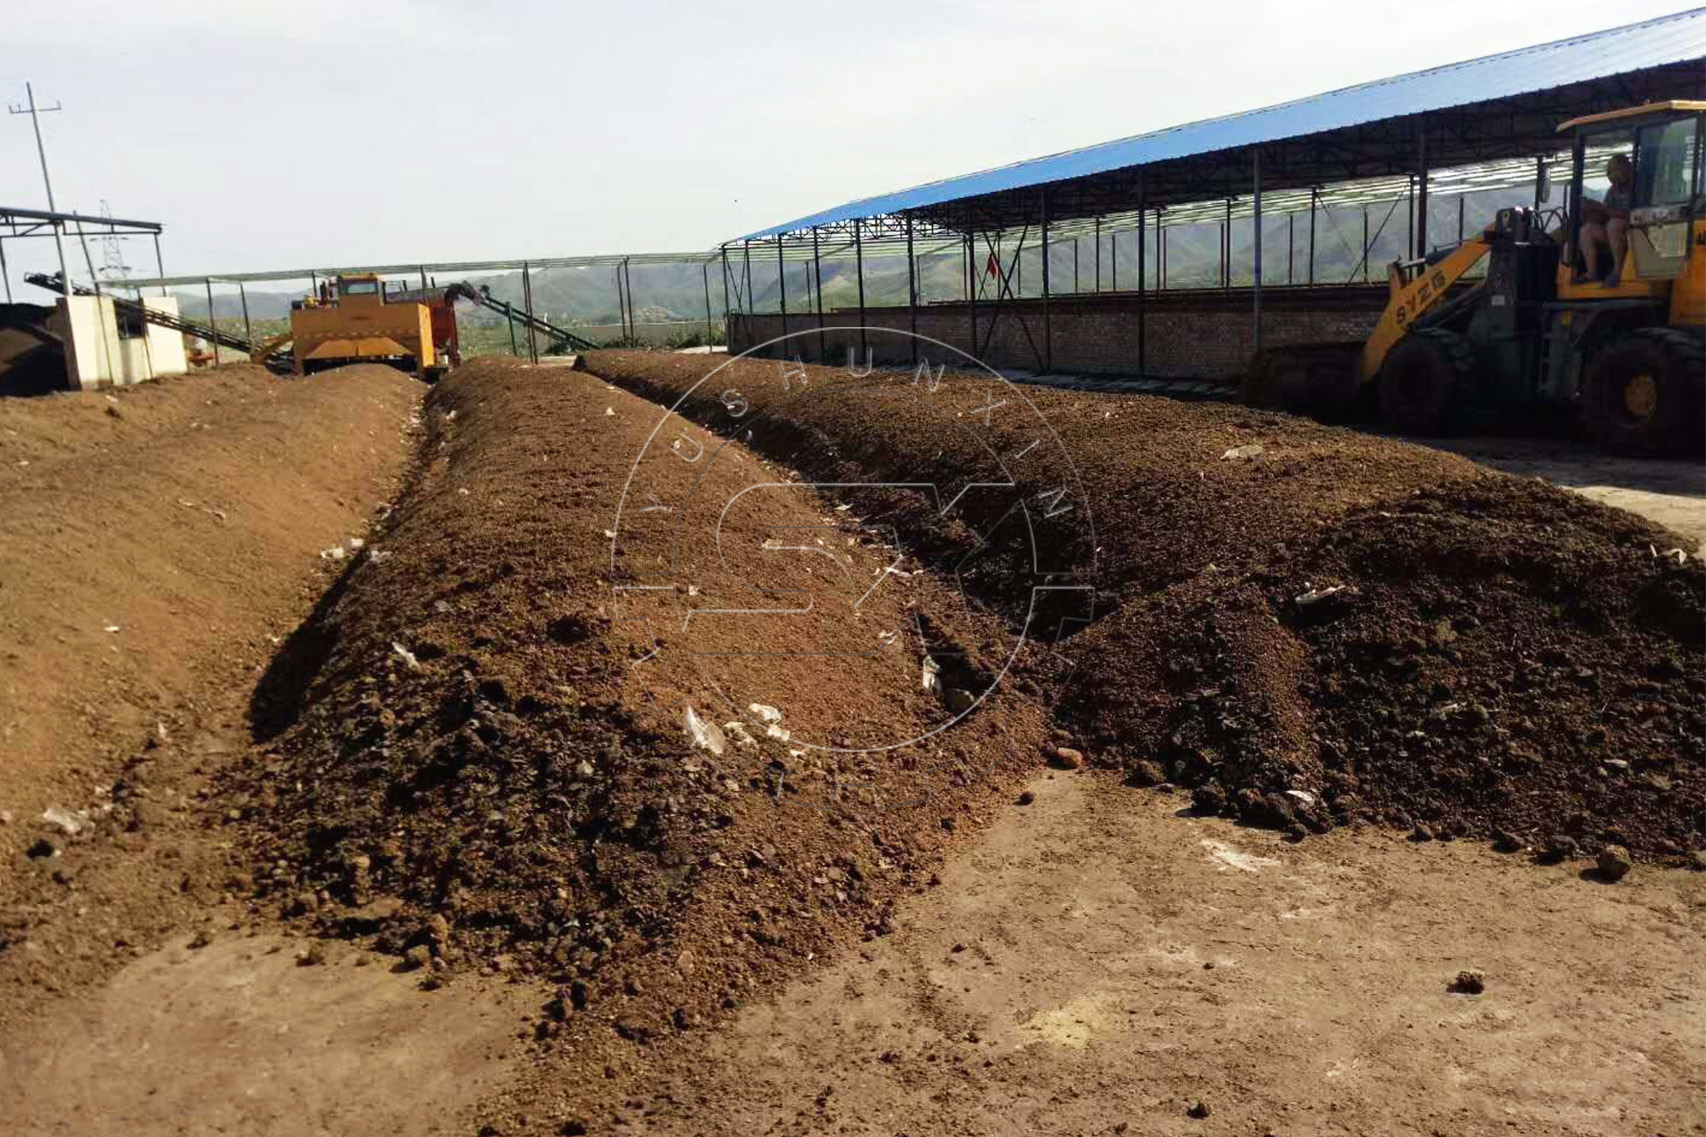 Composted Piles Processed by Windrow Type Compostor